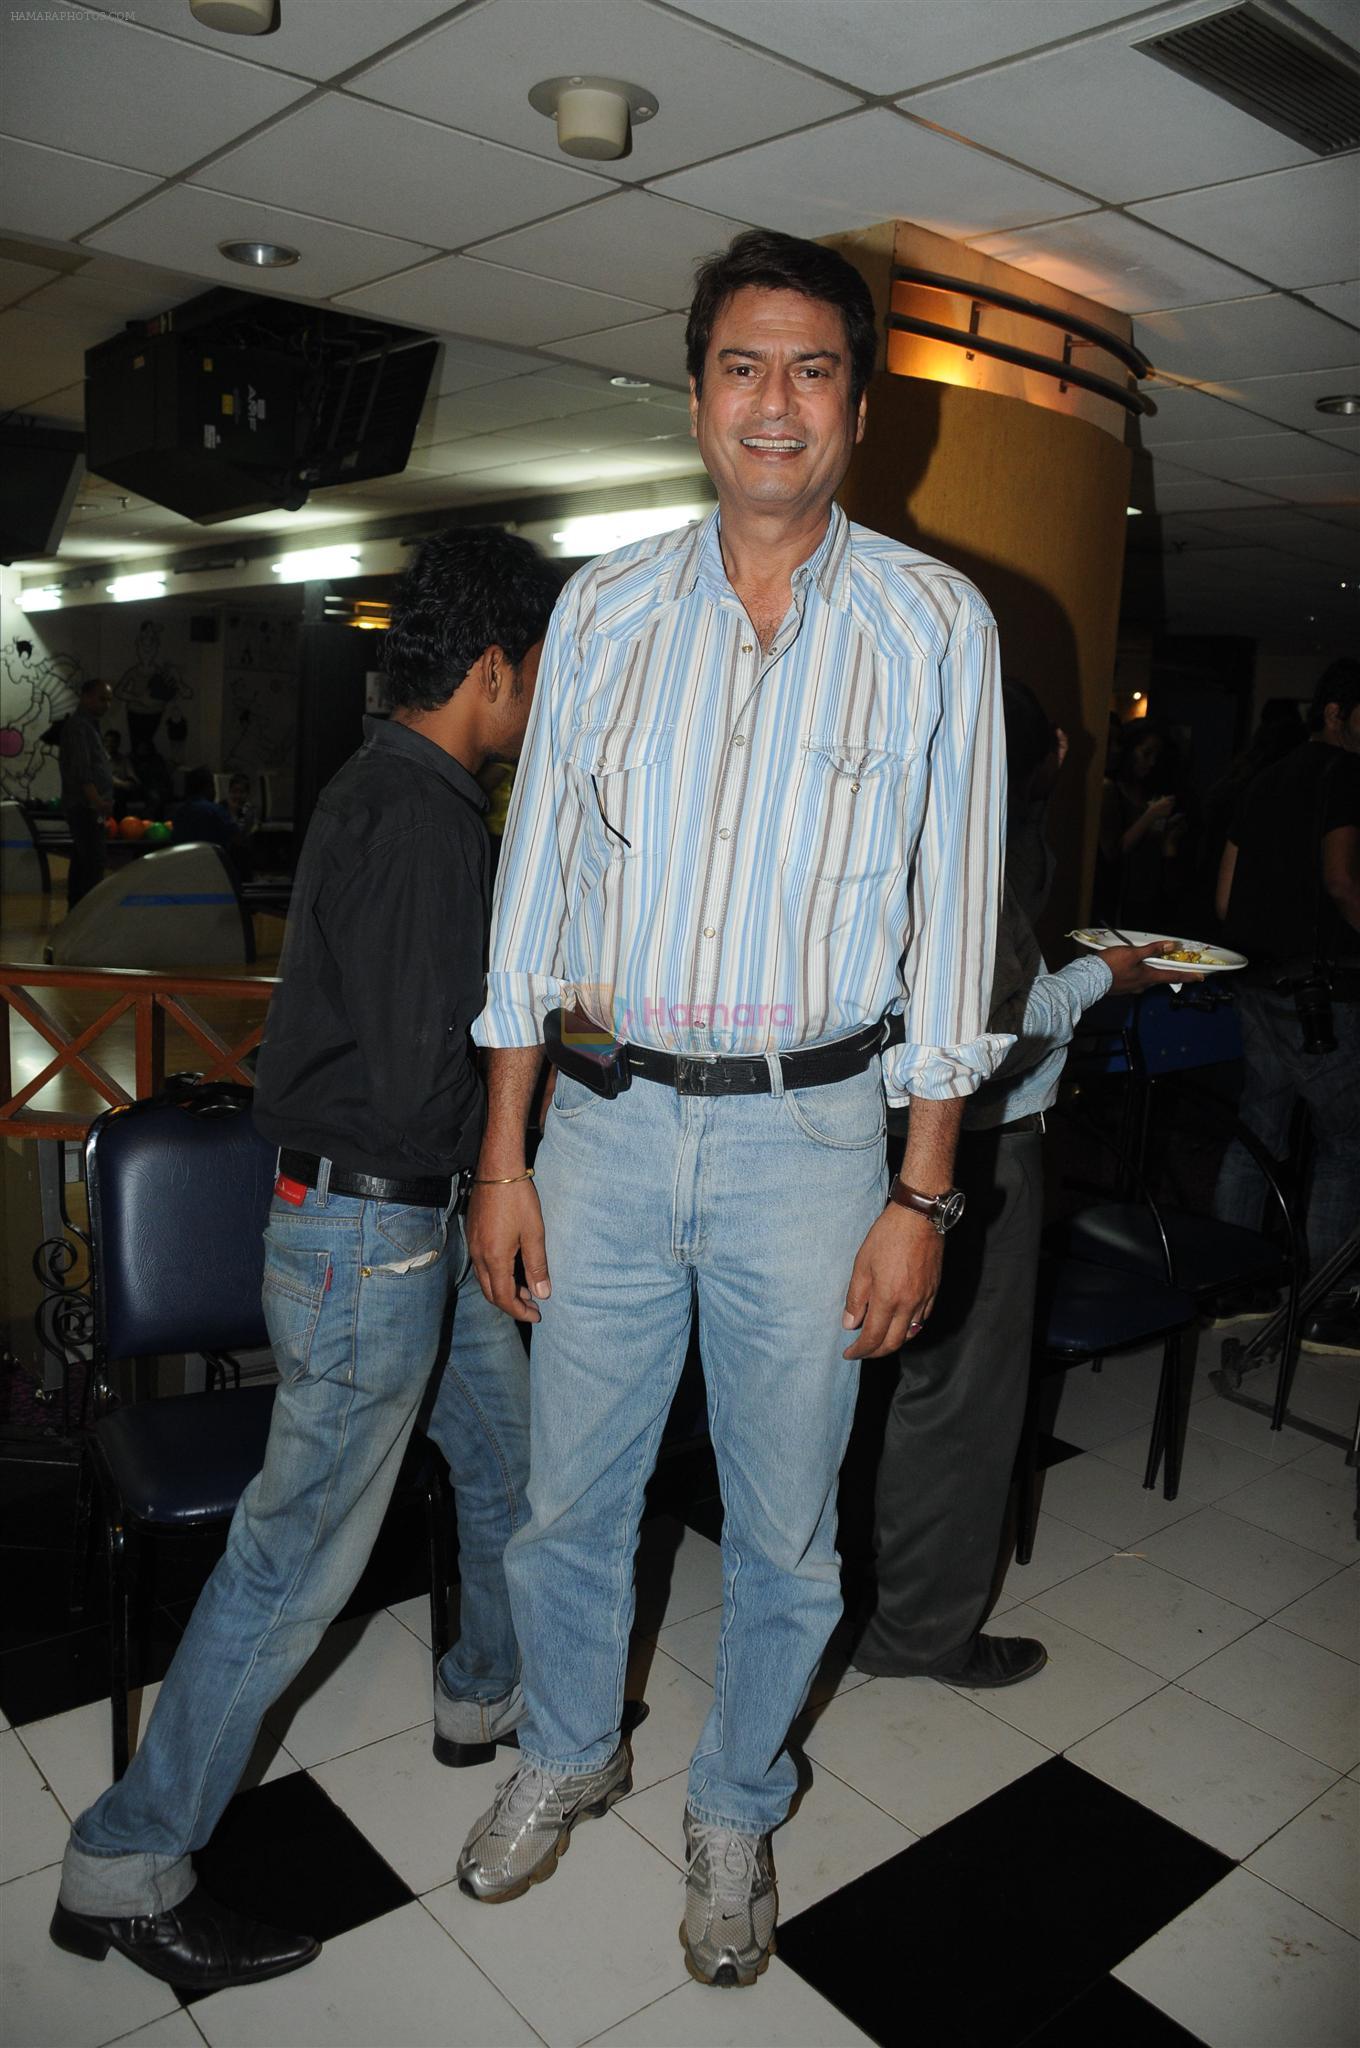 Kawaljeet at the Celebration of the Completion Party of 100 Episodes of PARVARISH kuch khatti kuch meethi in bowling alley on 7th April 2012